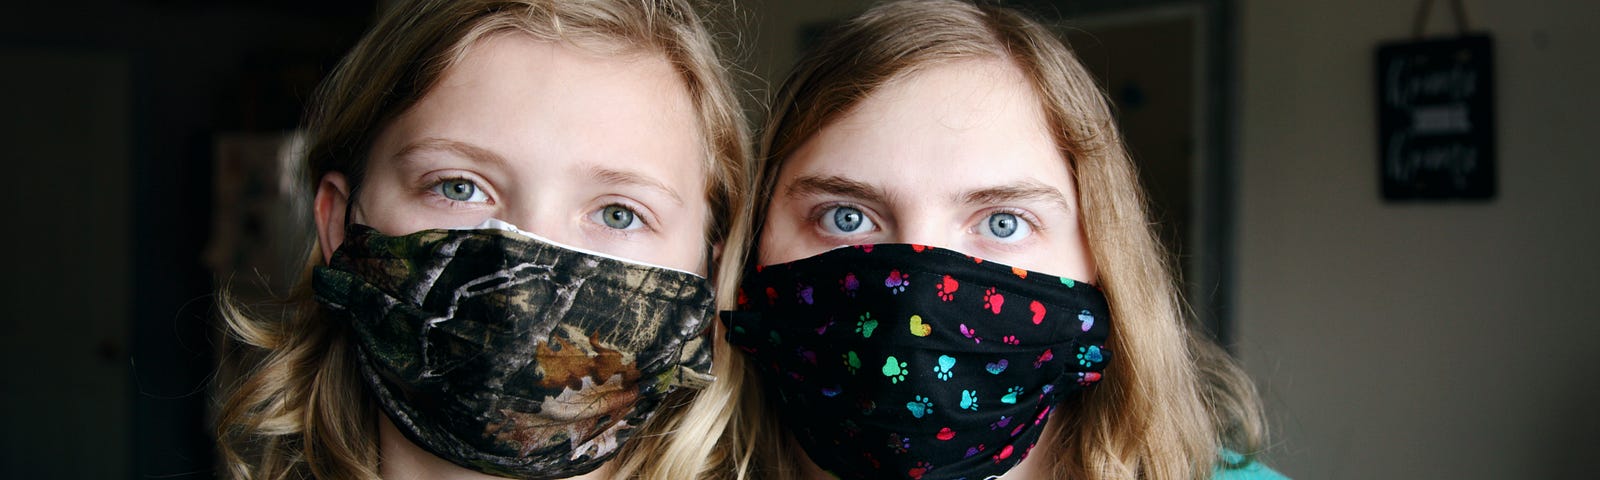 A woman and a girl wearing a facemask